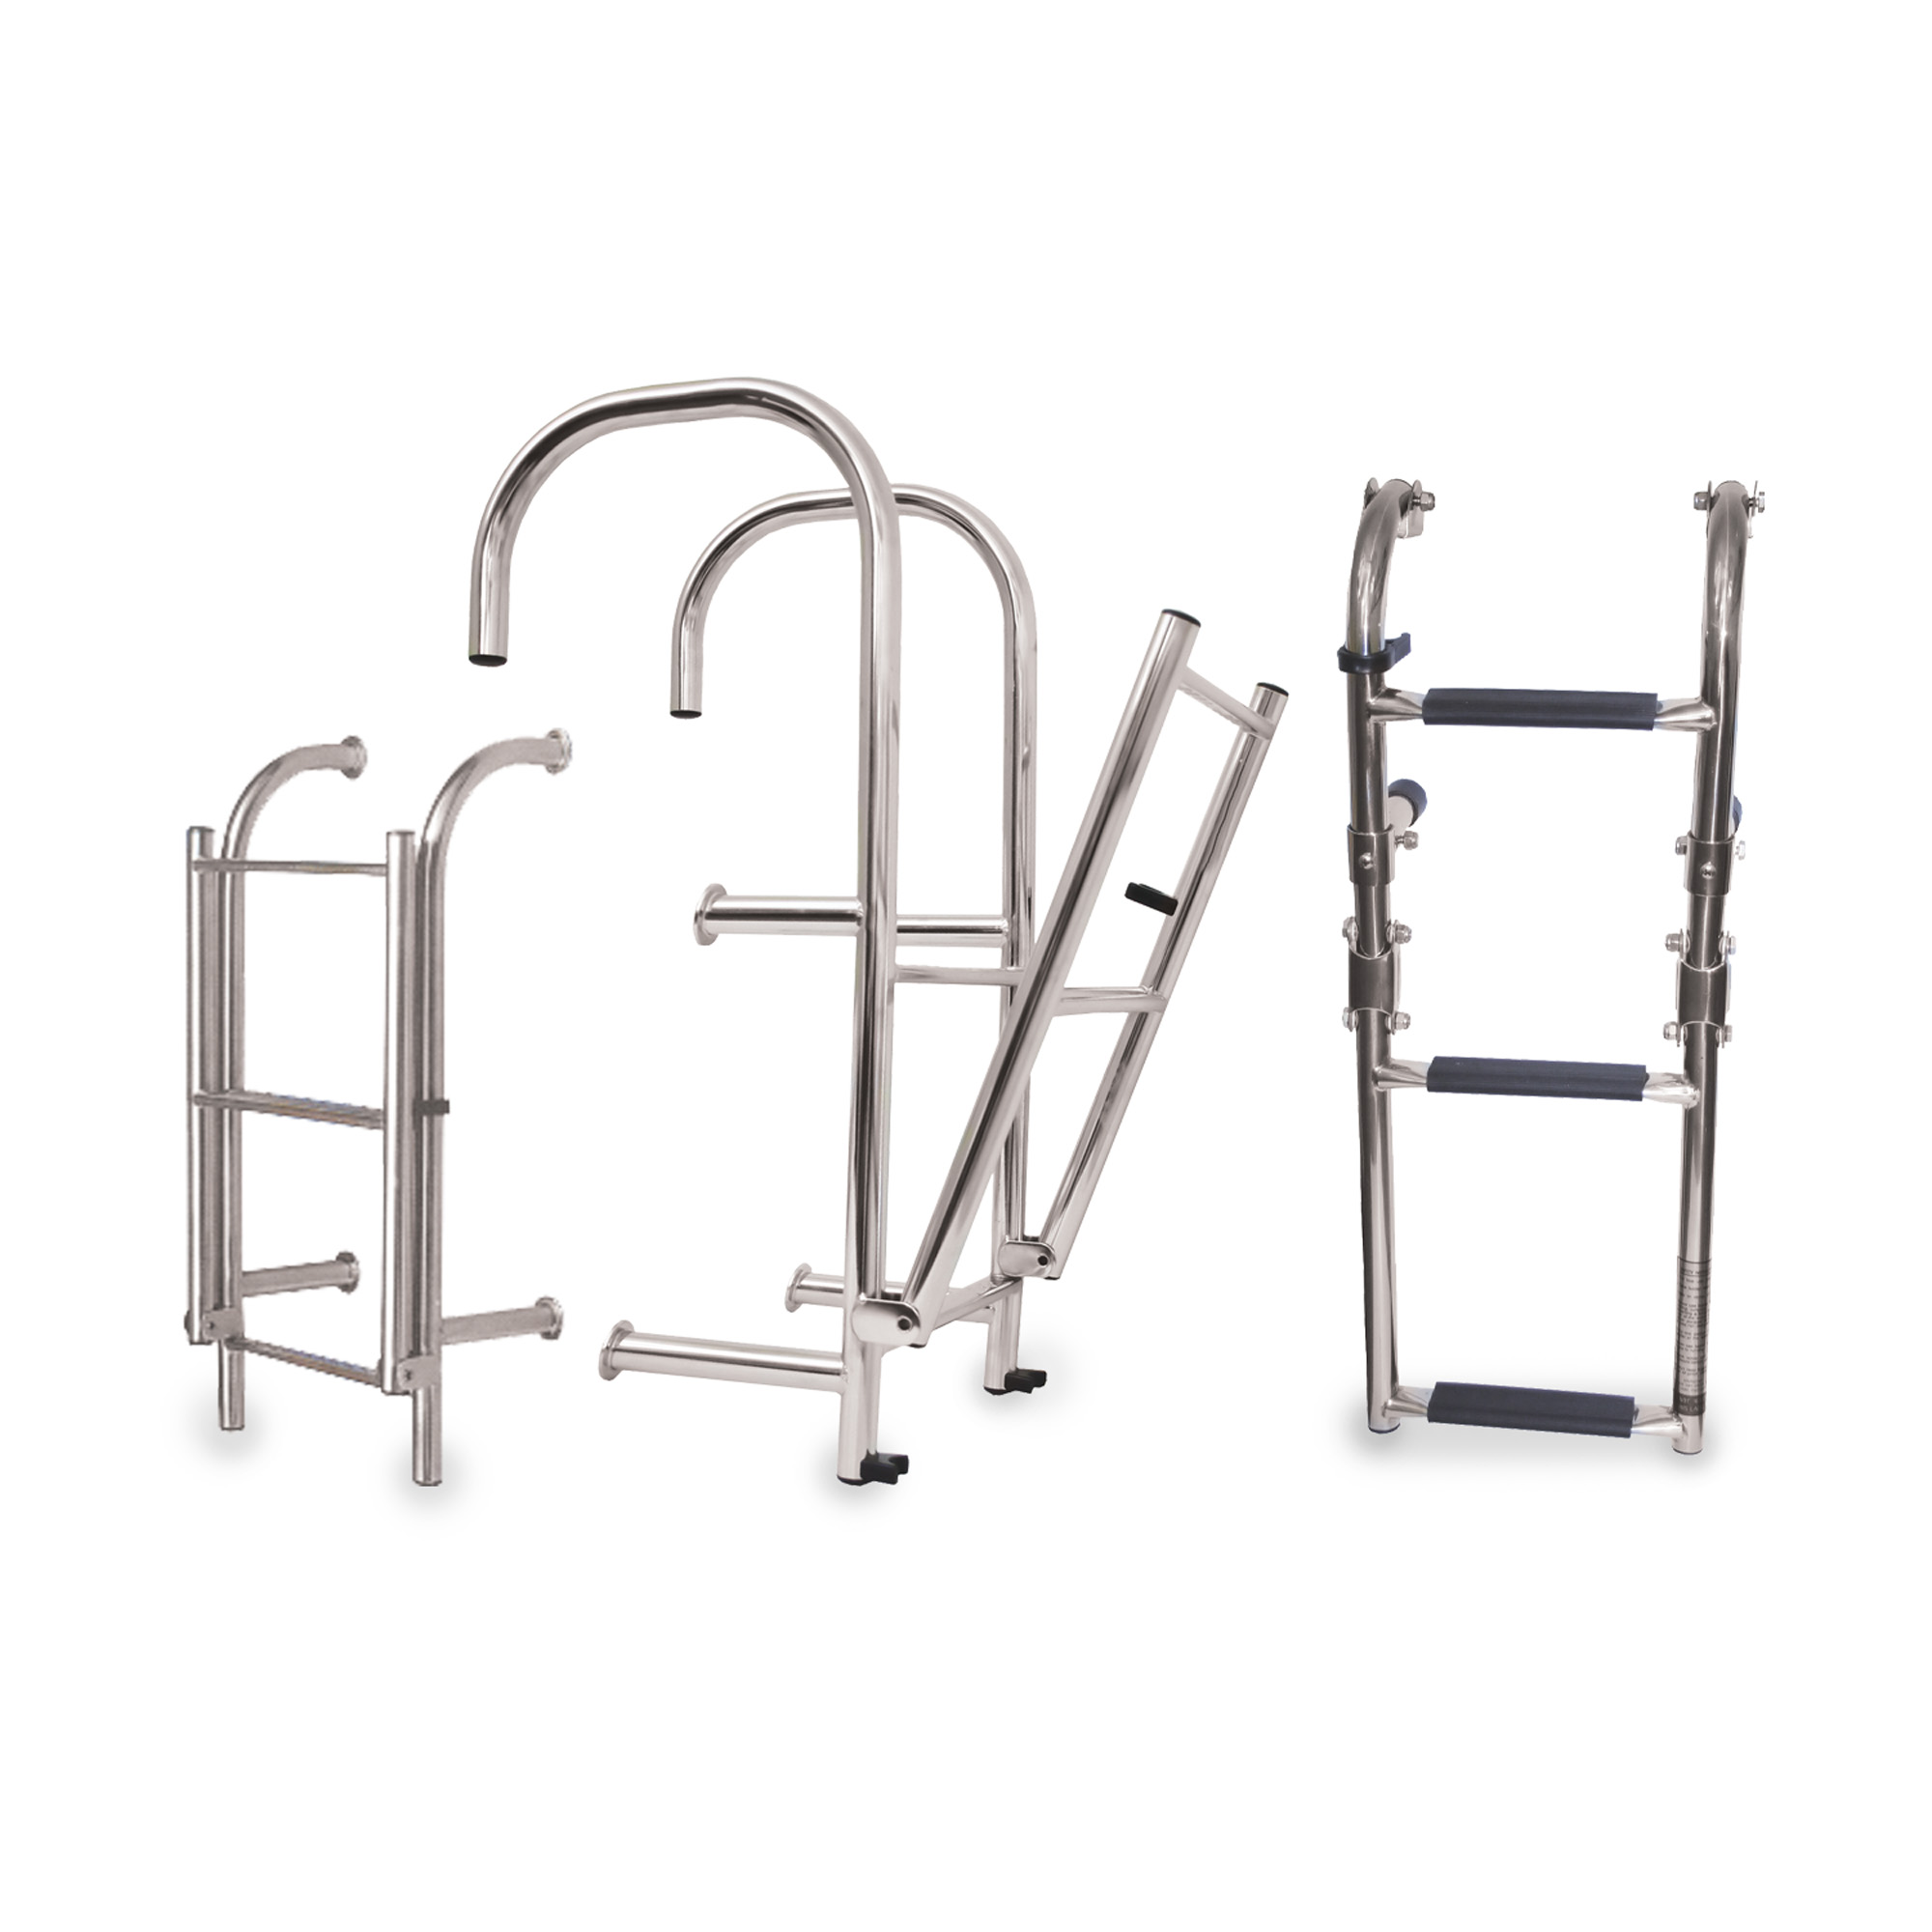 Product category - Ladders